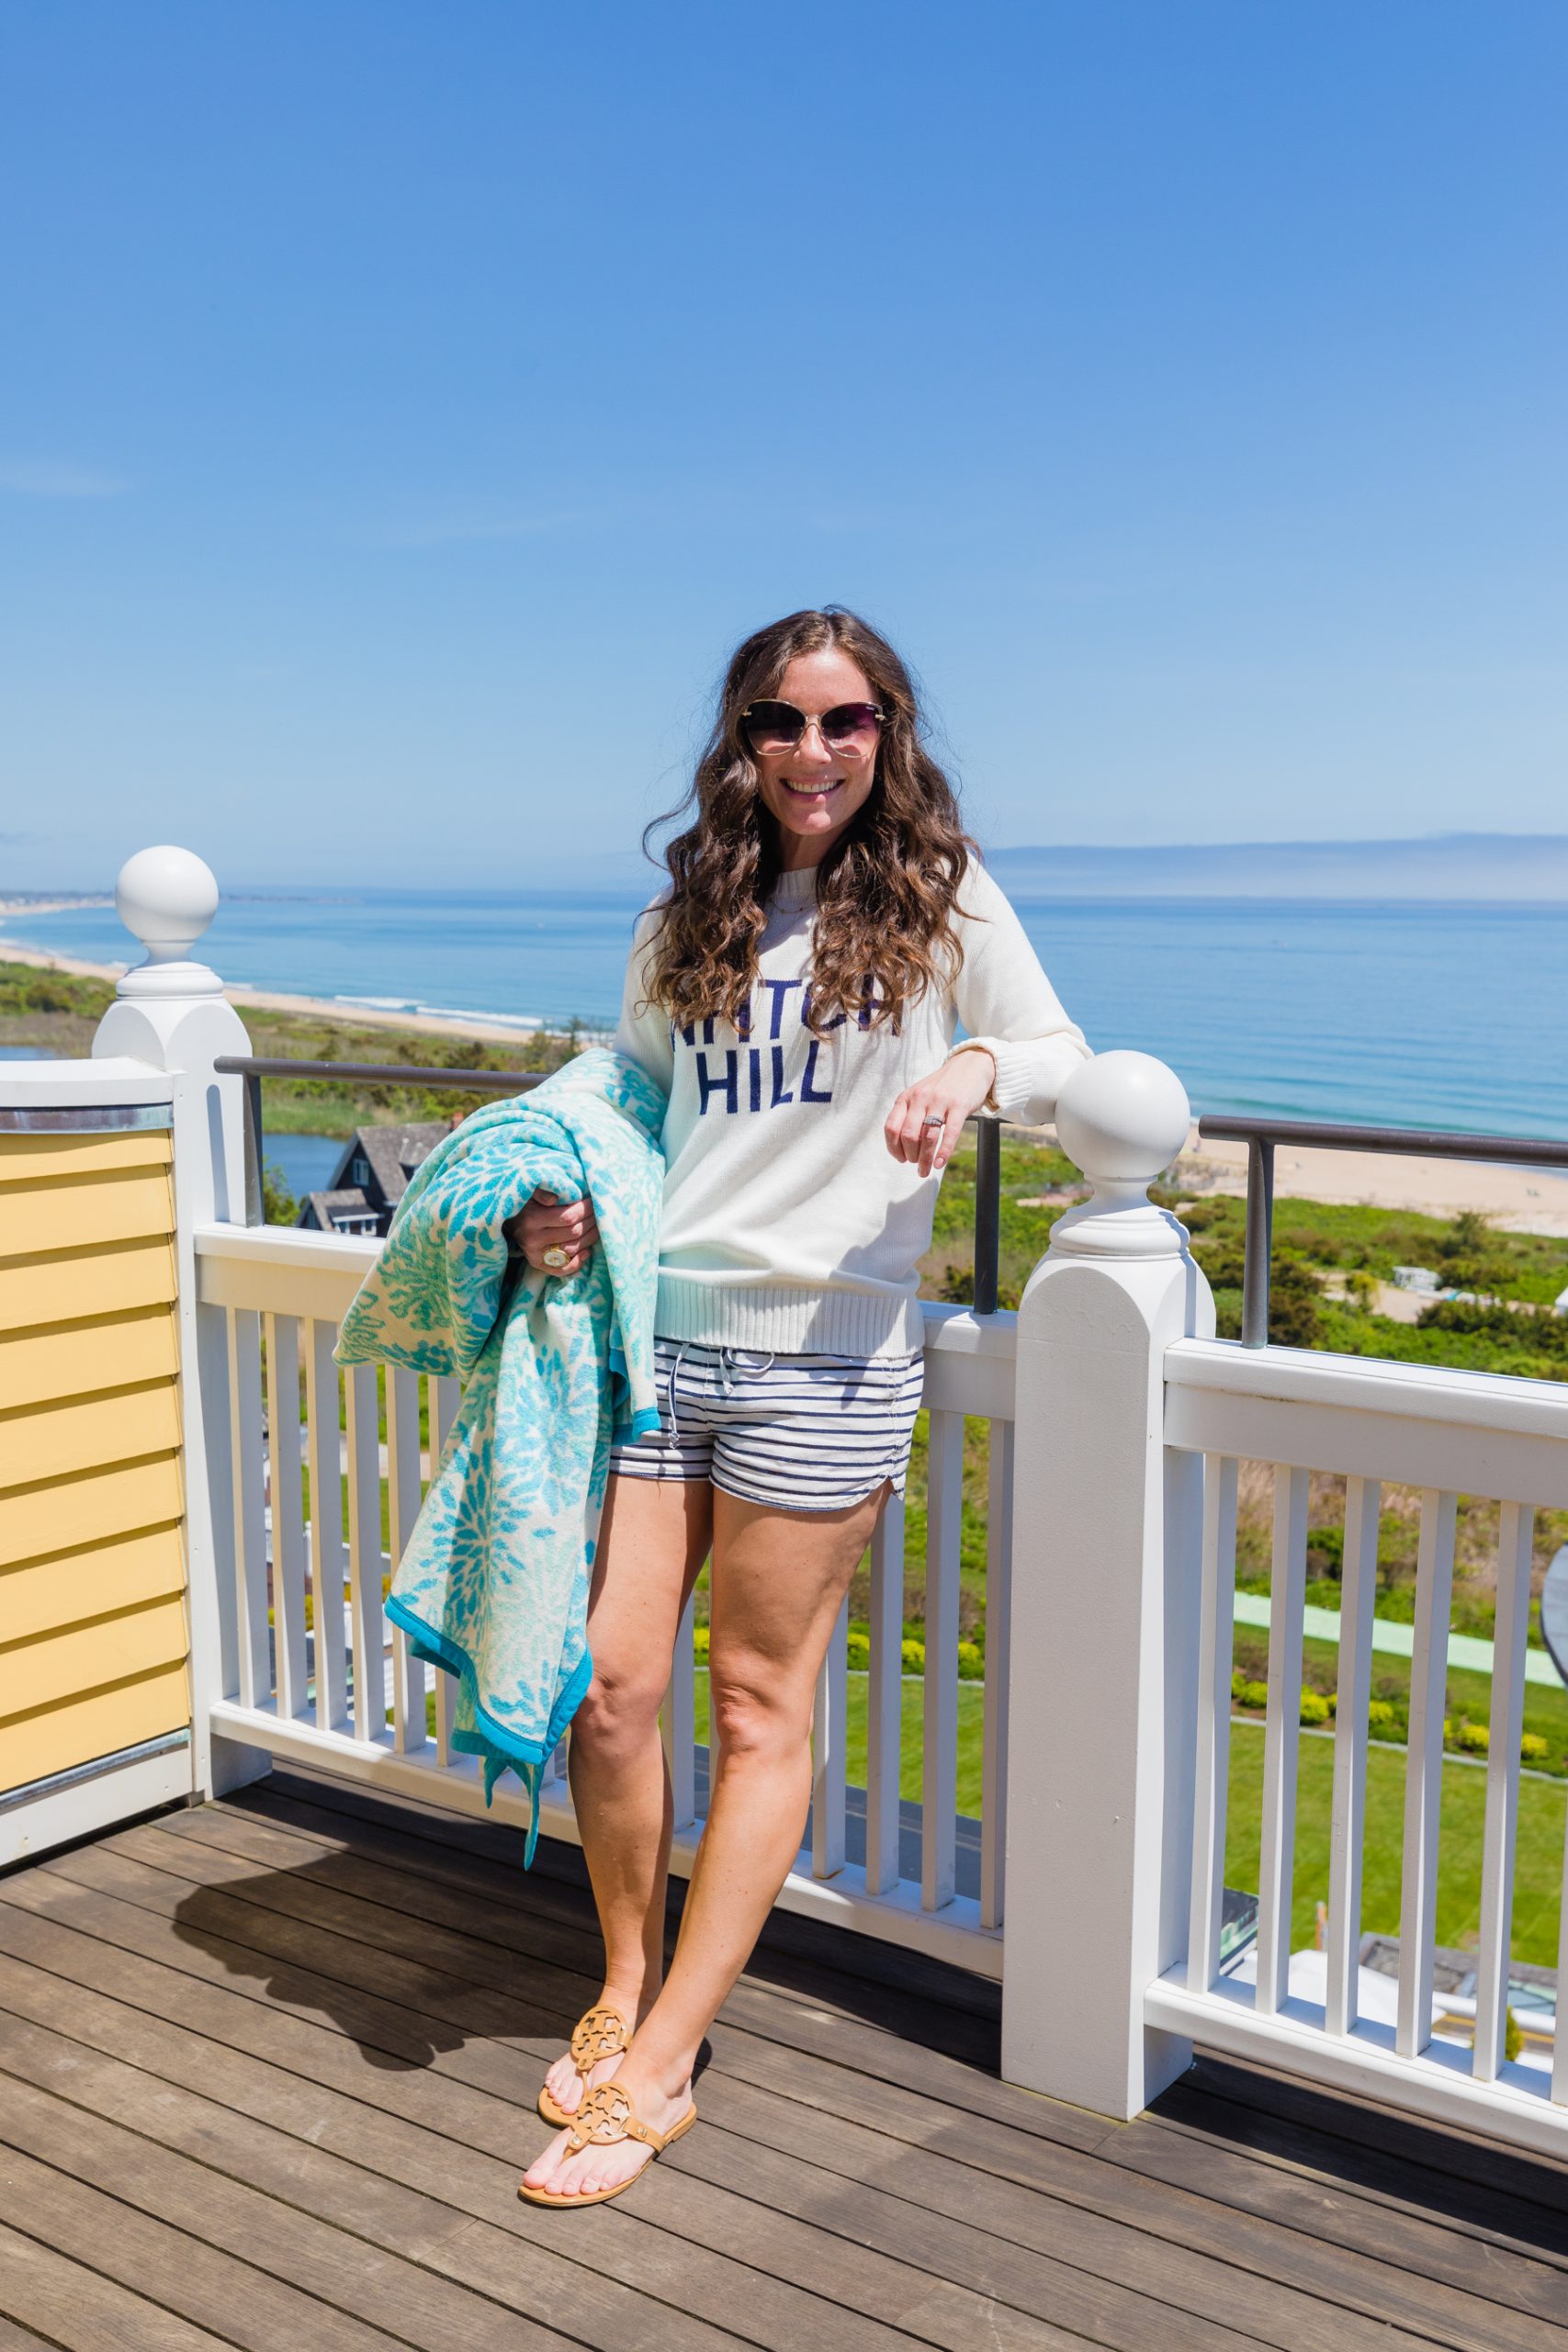 watch hill sweater, striped shorts, chappy wrap and neutral sandals